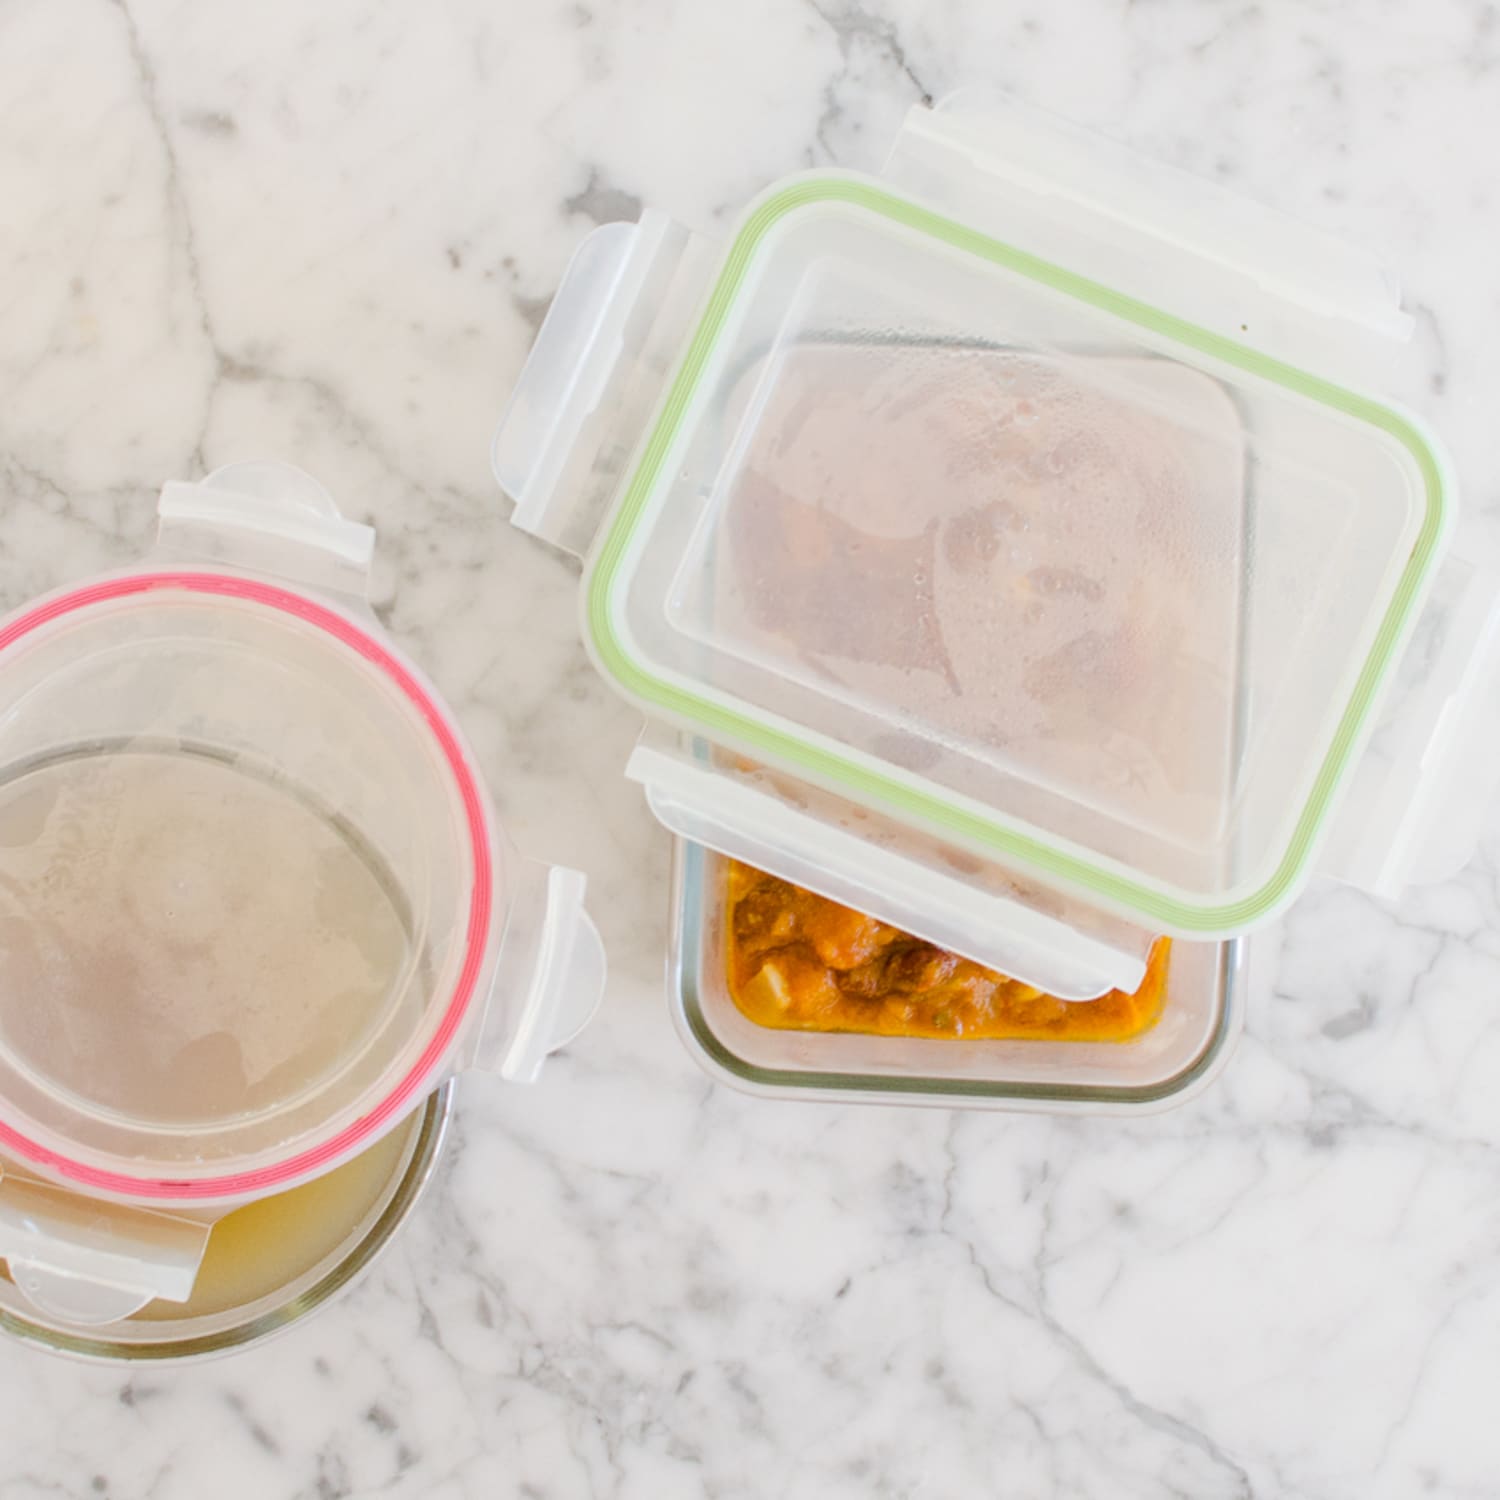 How to Reheat and Store Leftovers Safely